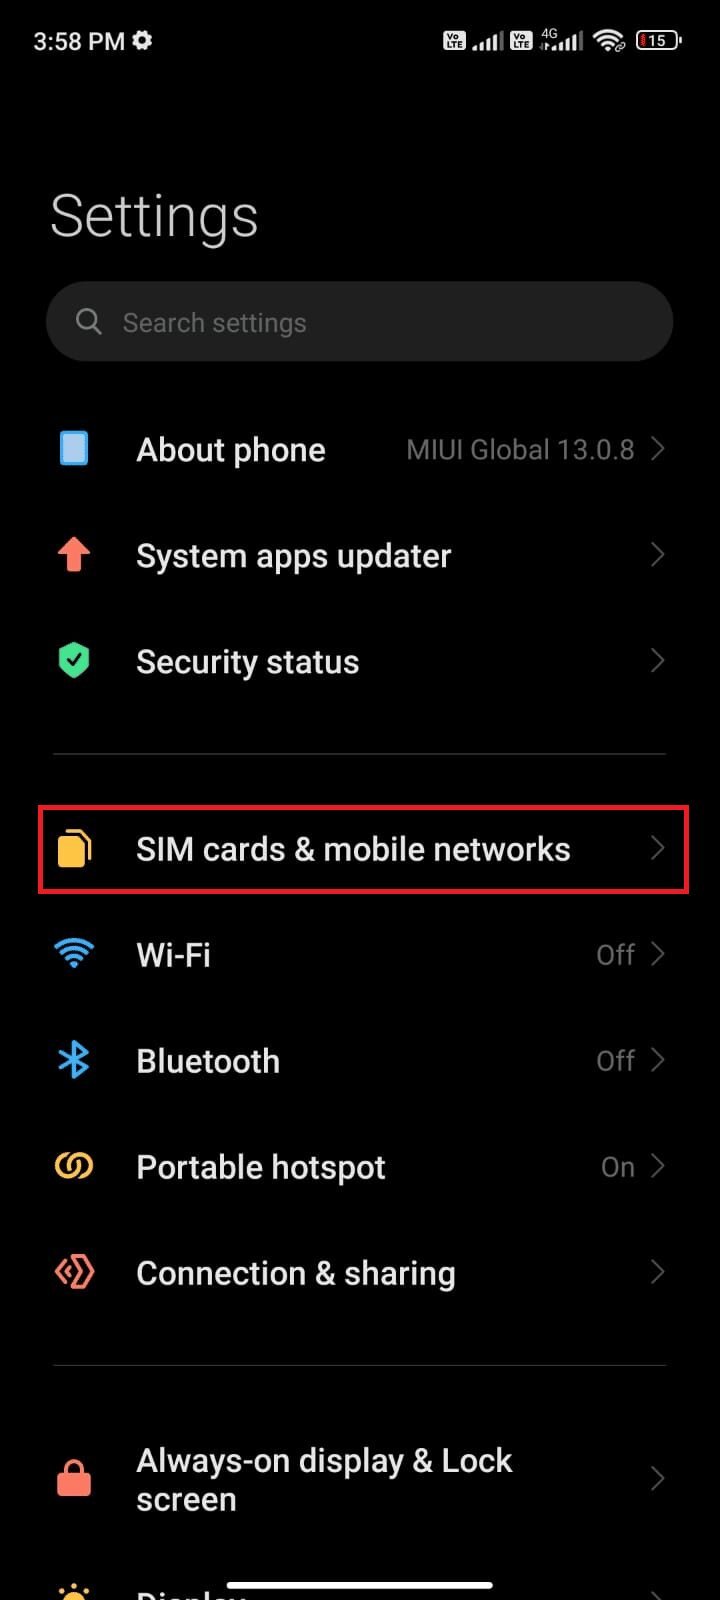 tap the SIM cards mobile networks option. 10 Ways to Fix Error Performing Query Facebook